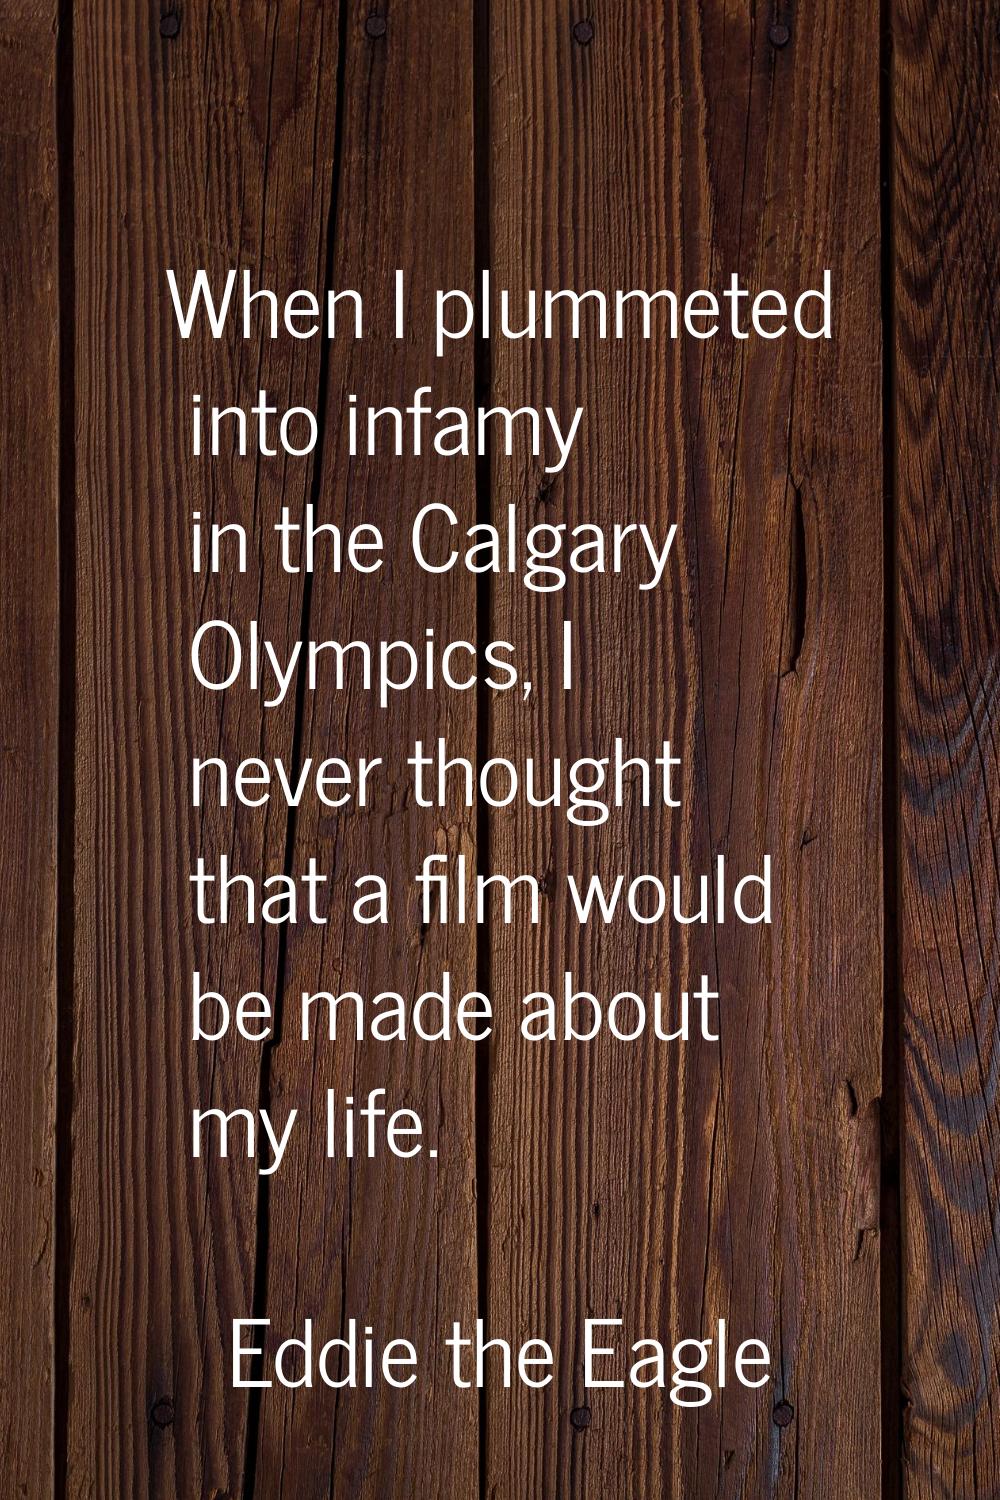 When I plummeted into infamy in the Calgary Olympics, I never thought that a film would be made abo